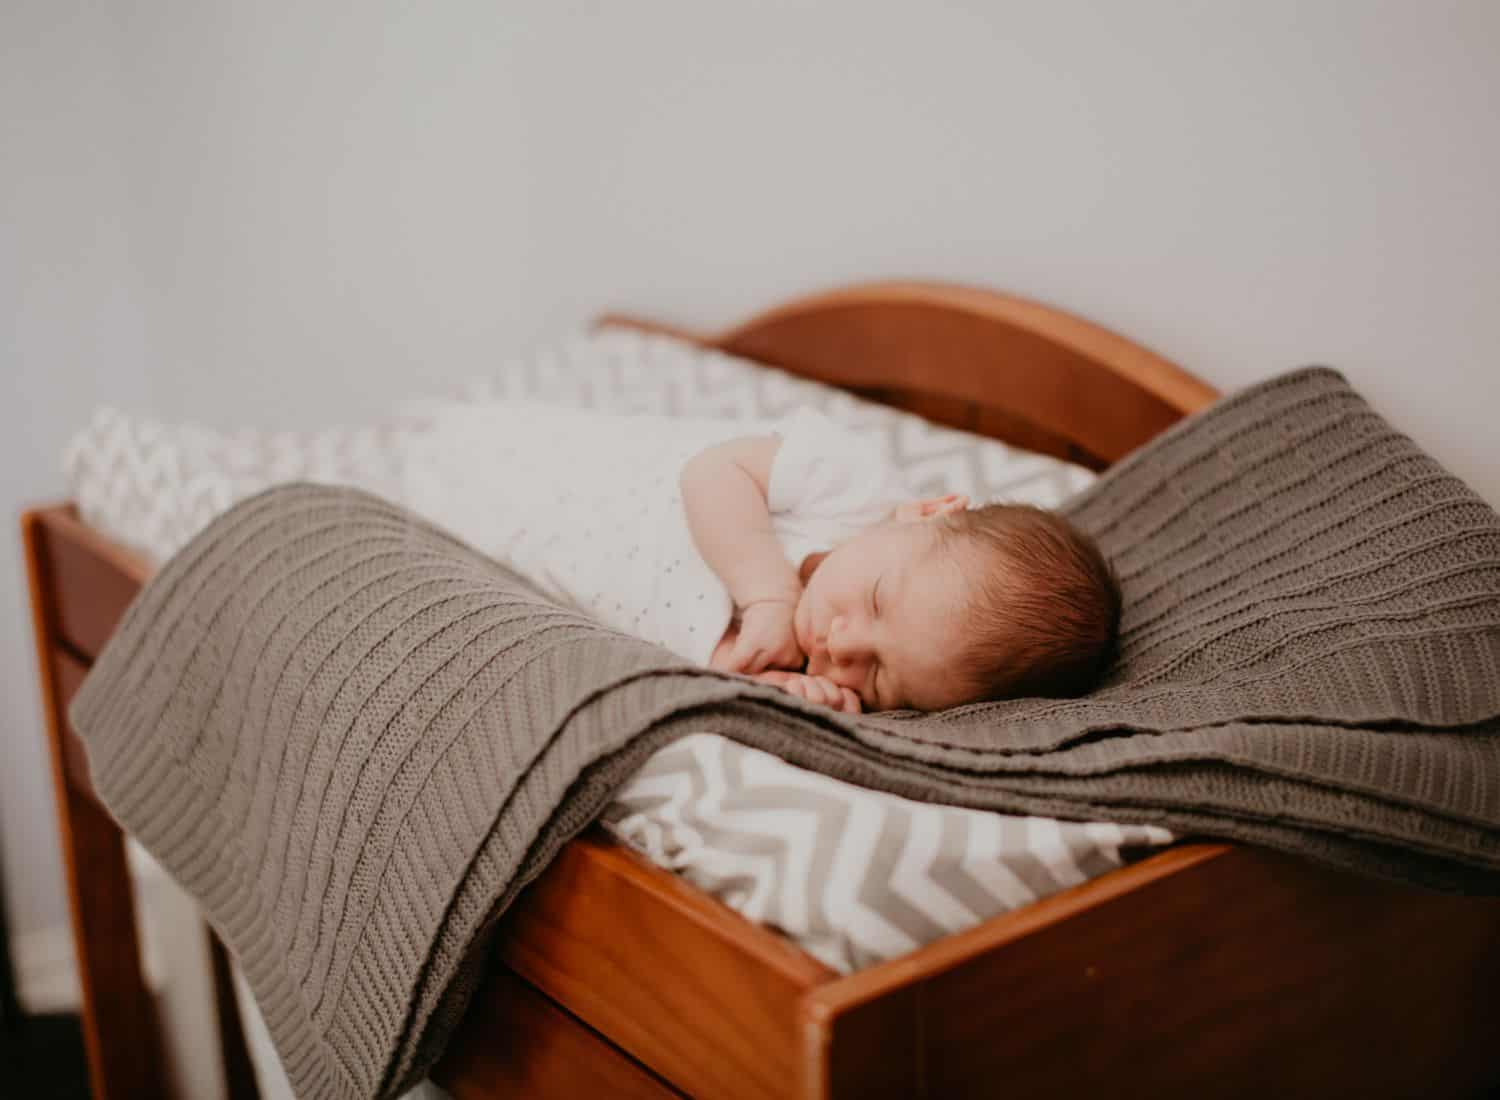 Lifestyle Newborn Photos: In this nap-time photo, a newborn baby lies on a knitted blanket bathed in windowlight.